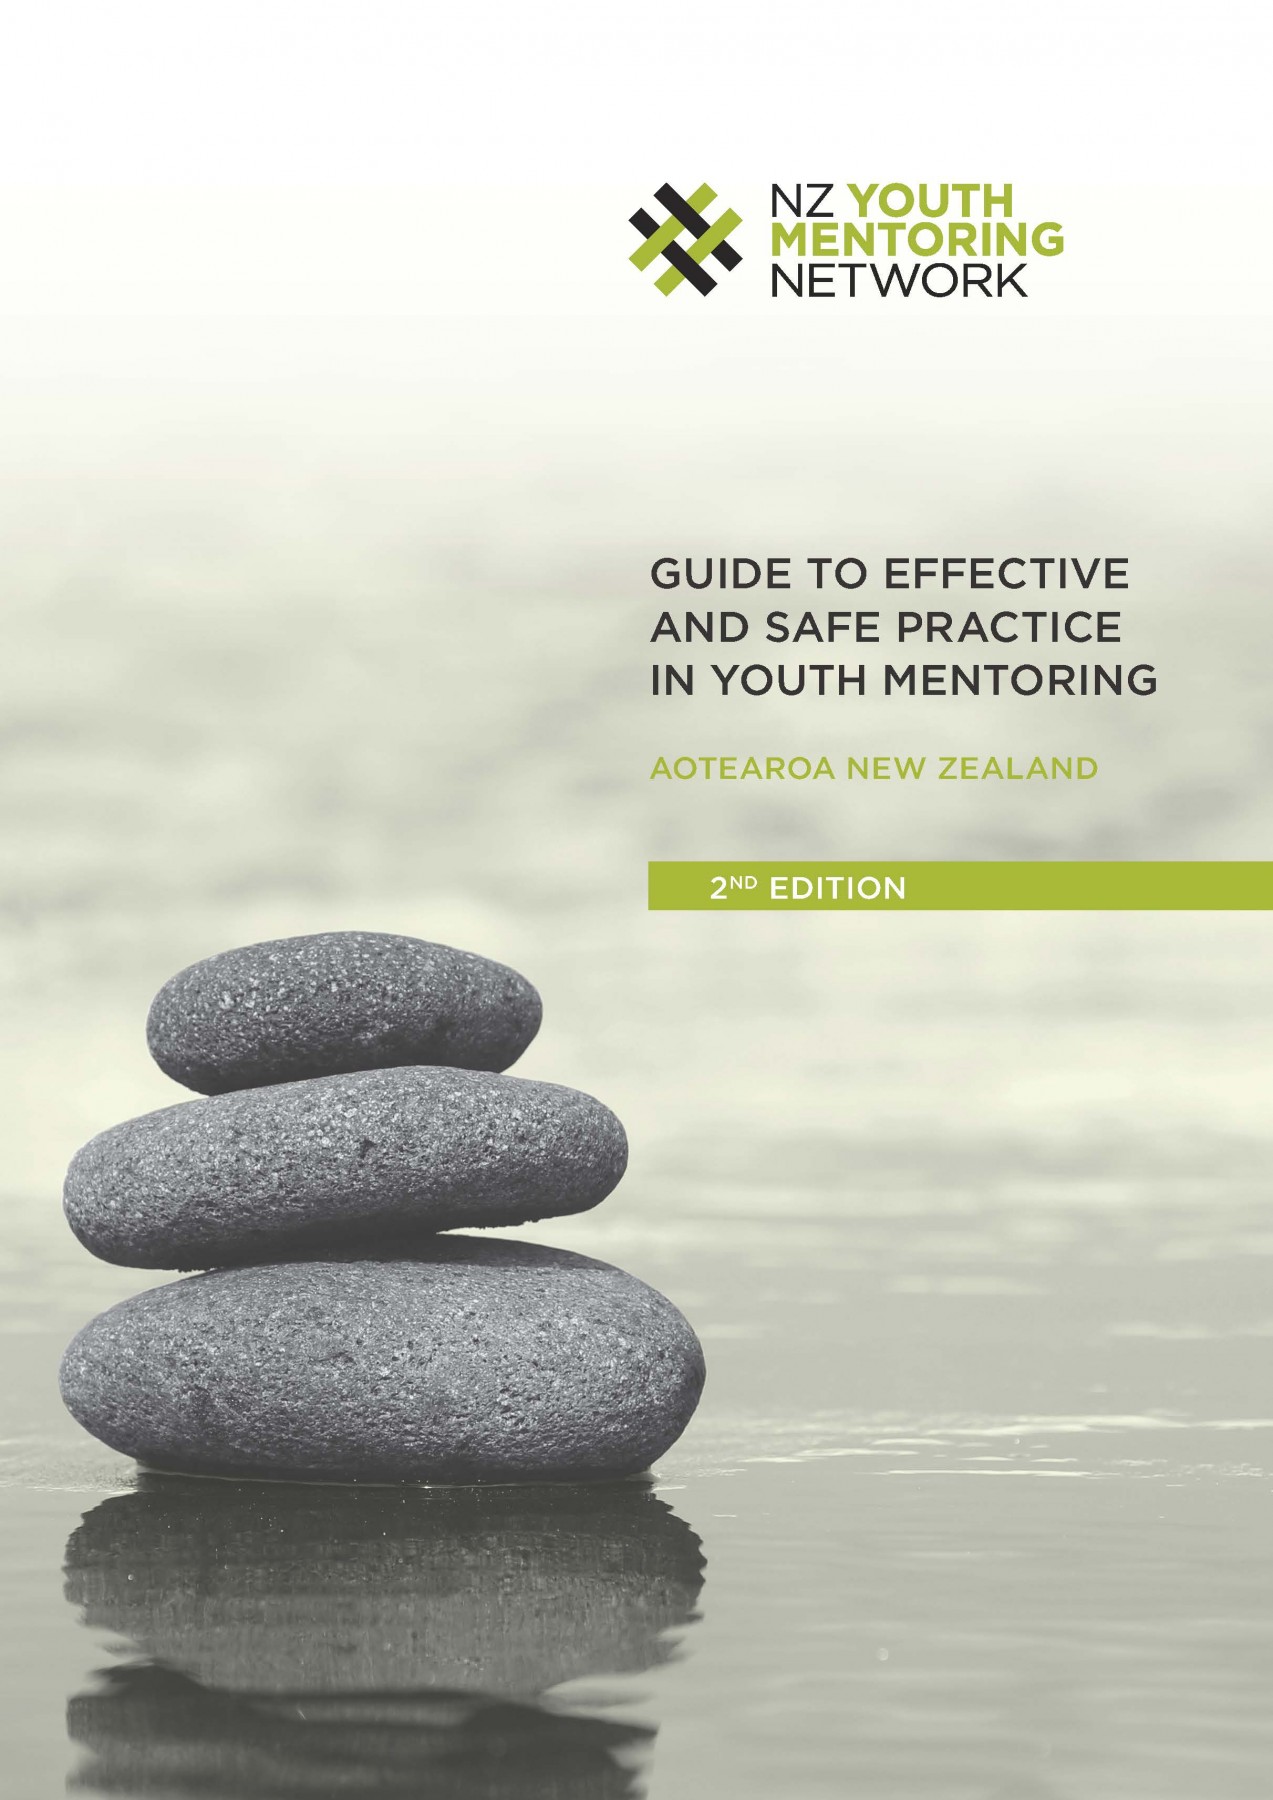 Guide to effective and safe practice in youth mentoring